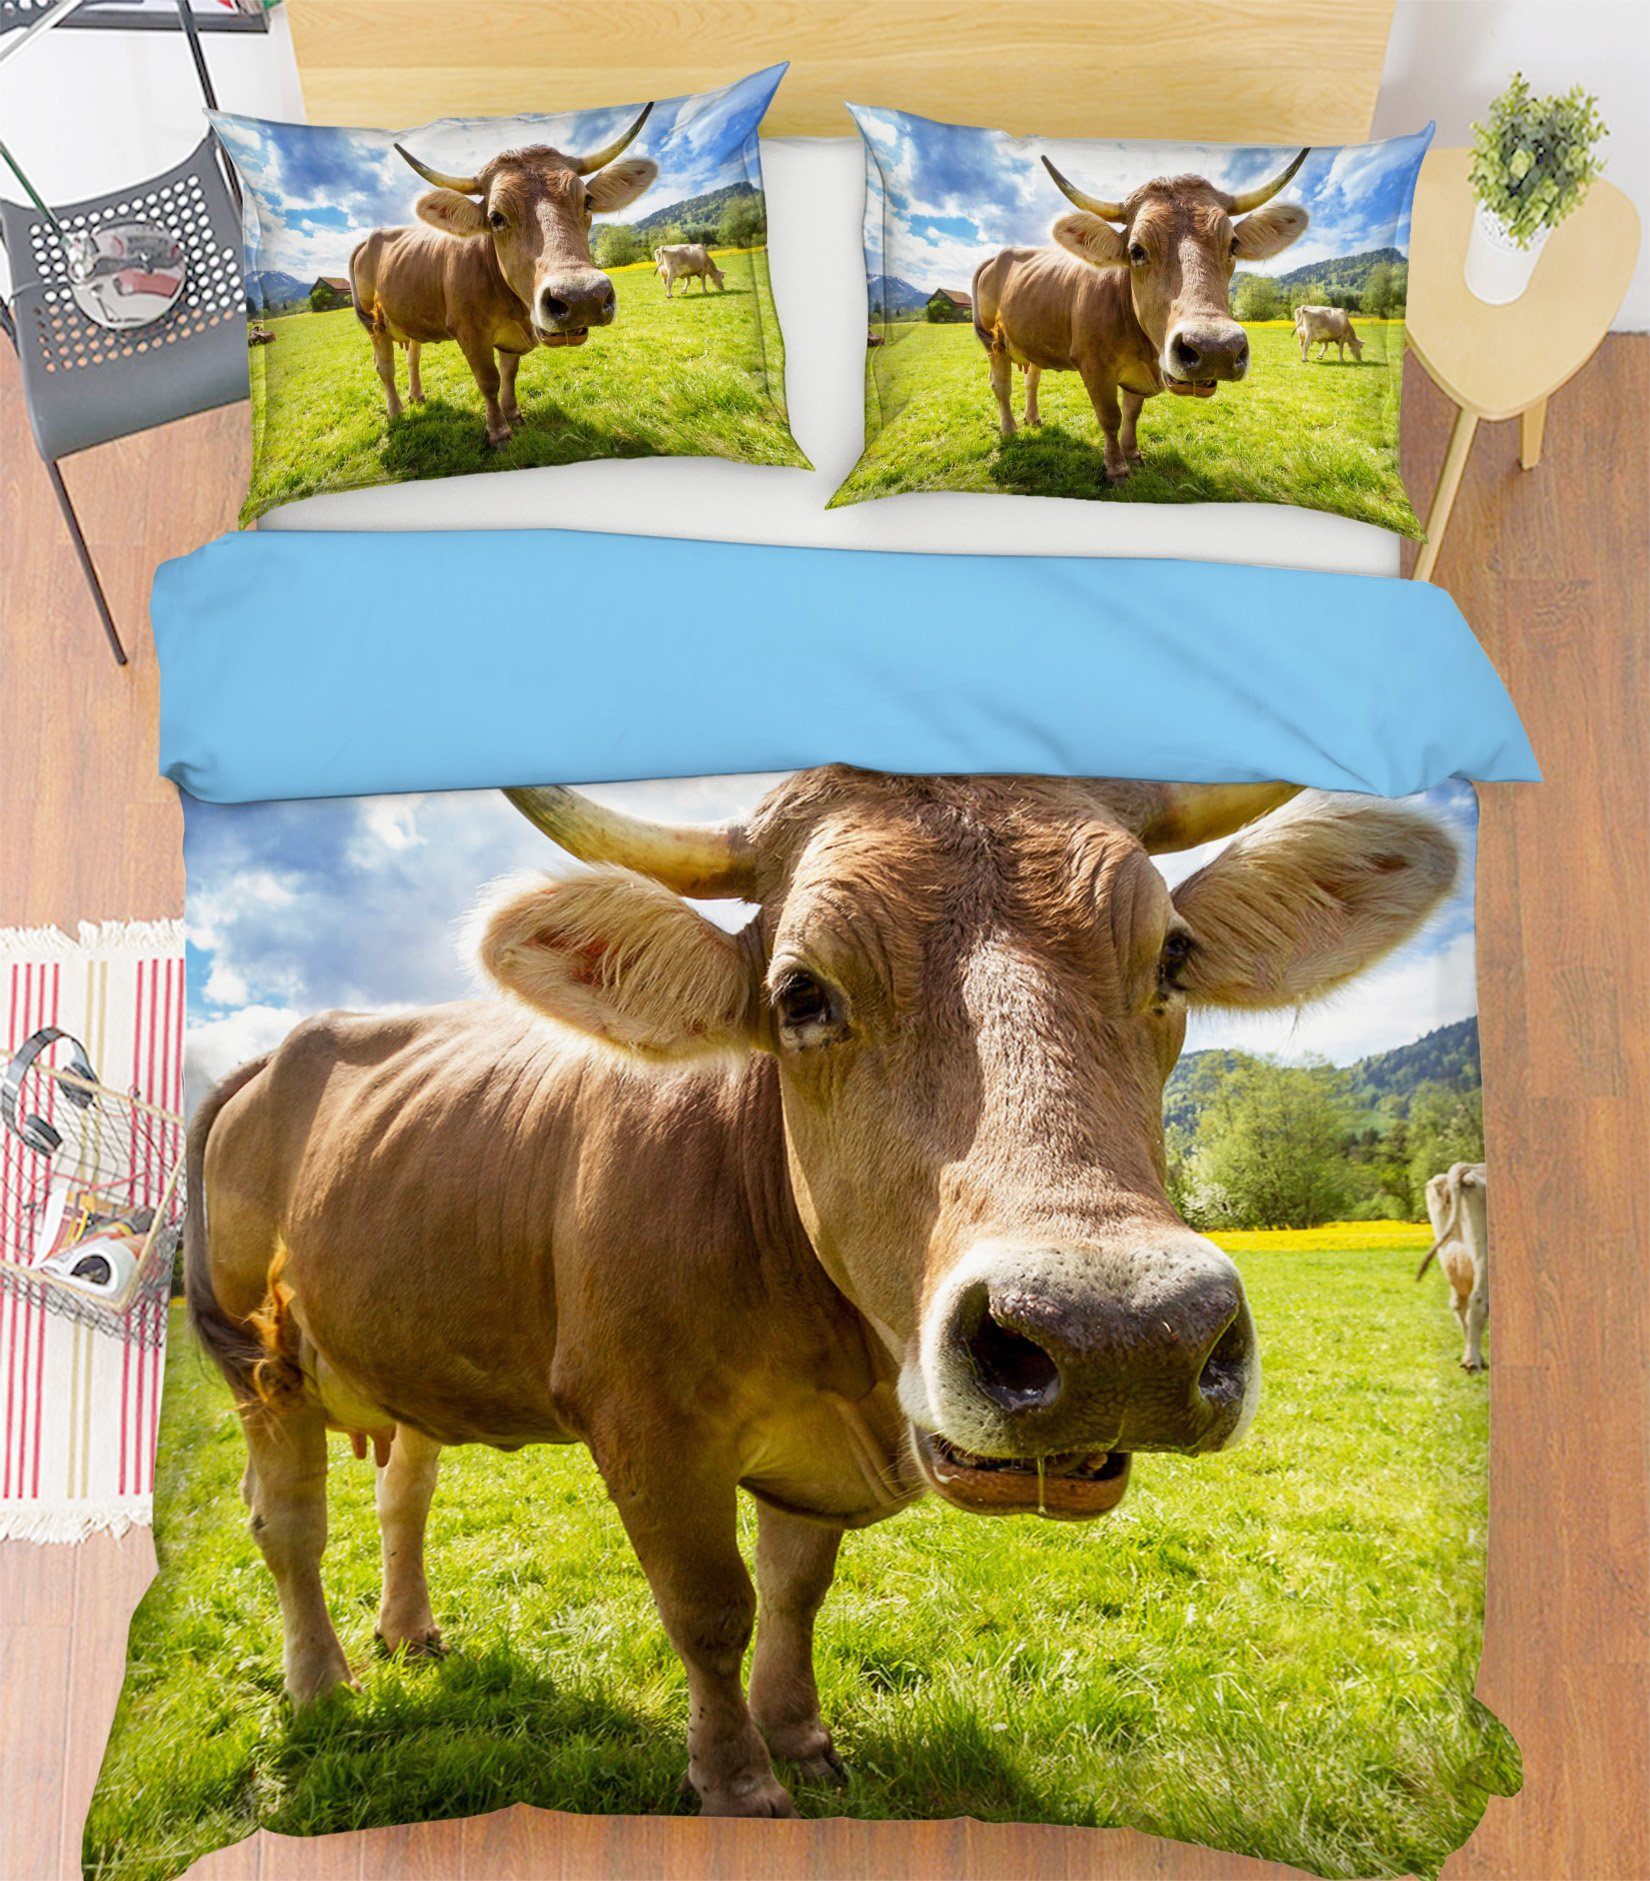 3D Cow Mouth 1926 Bed Pillowcases Quilt Quiet Covers AJ Creativity Home 